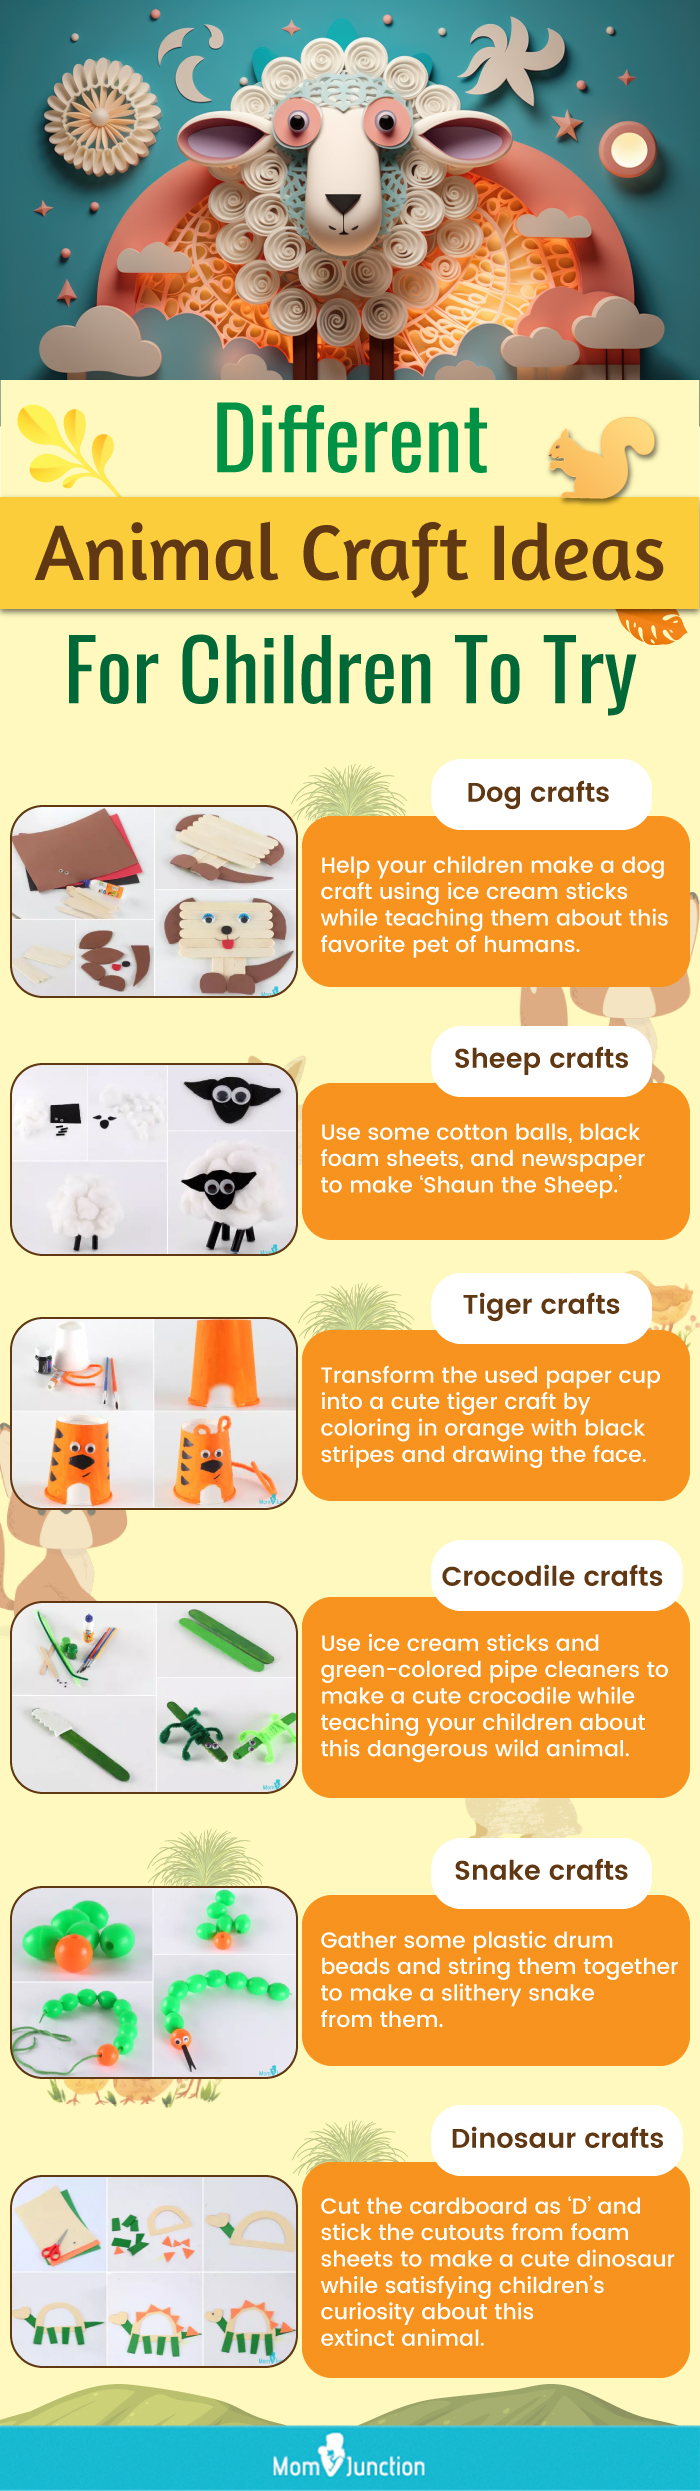 https://www.momjunction.com/wp-content/uploads/2014/09/Different-Animal-Craft-Ideas-For-Children-To-Try.jpg